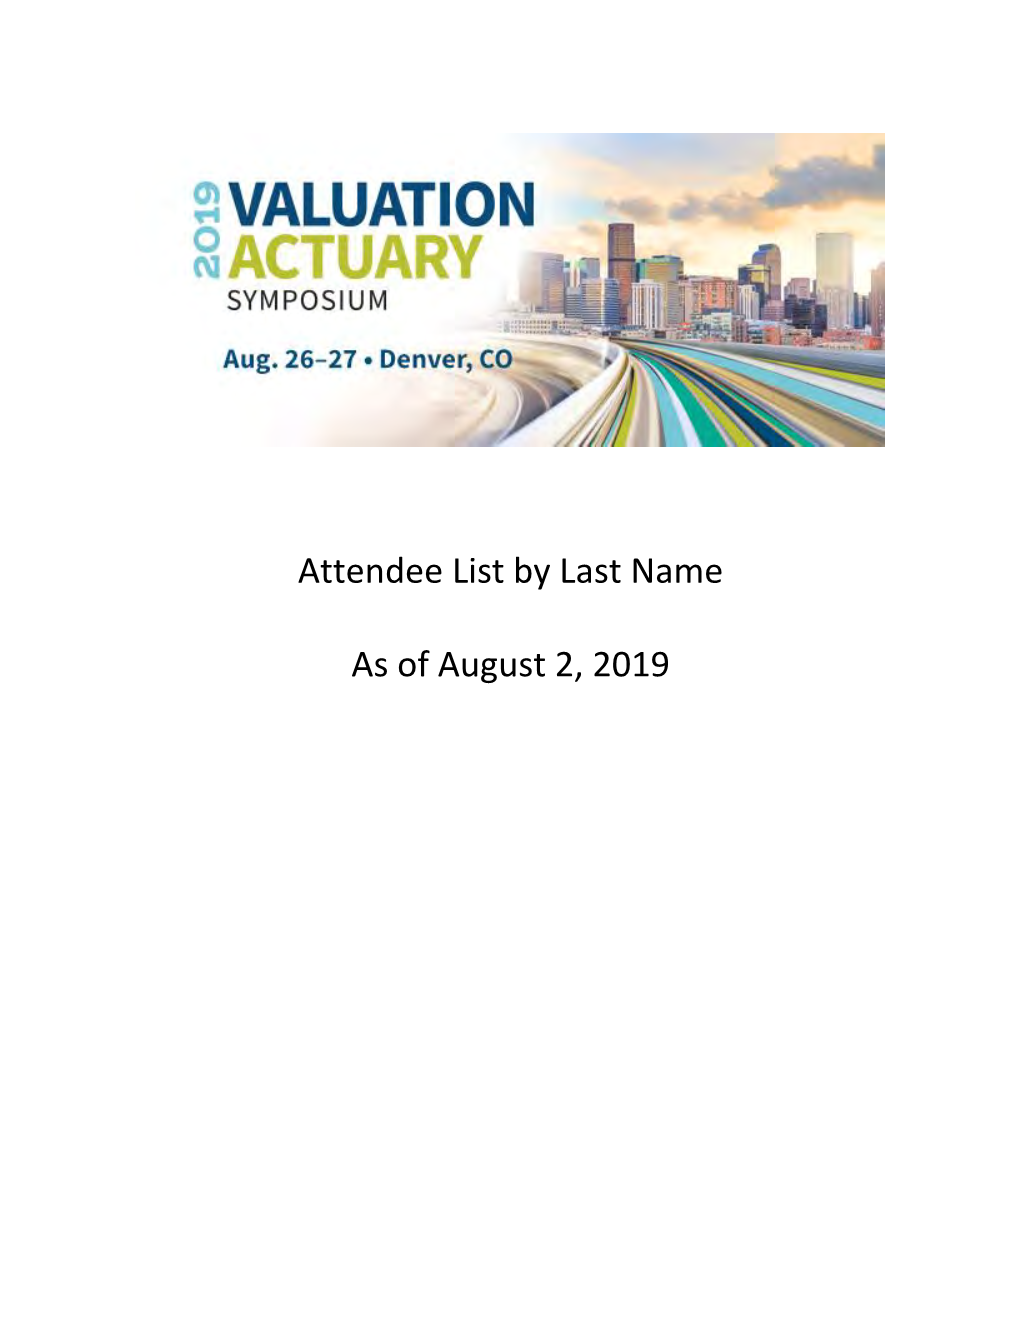 Attendee List by Last Name As of August 2, 2019